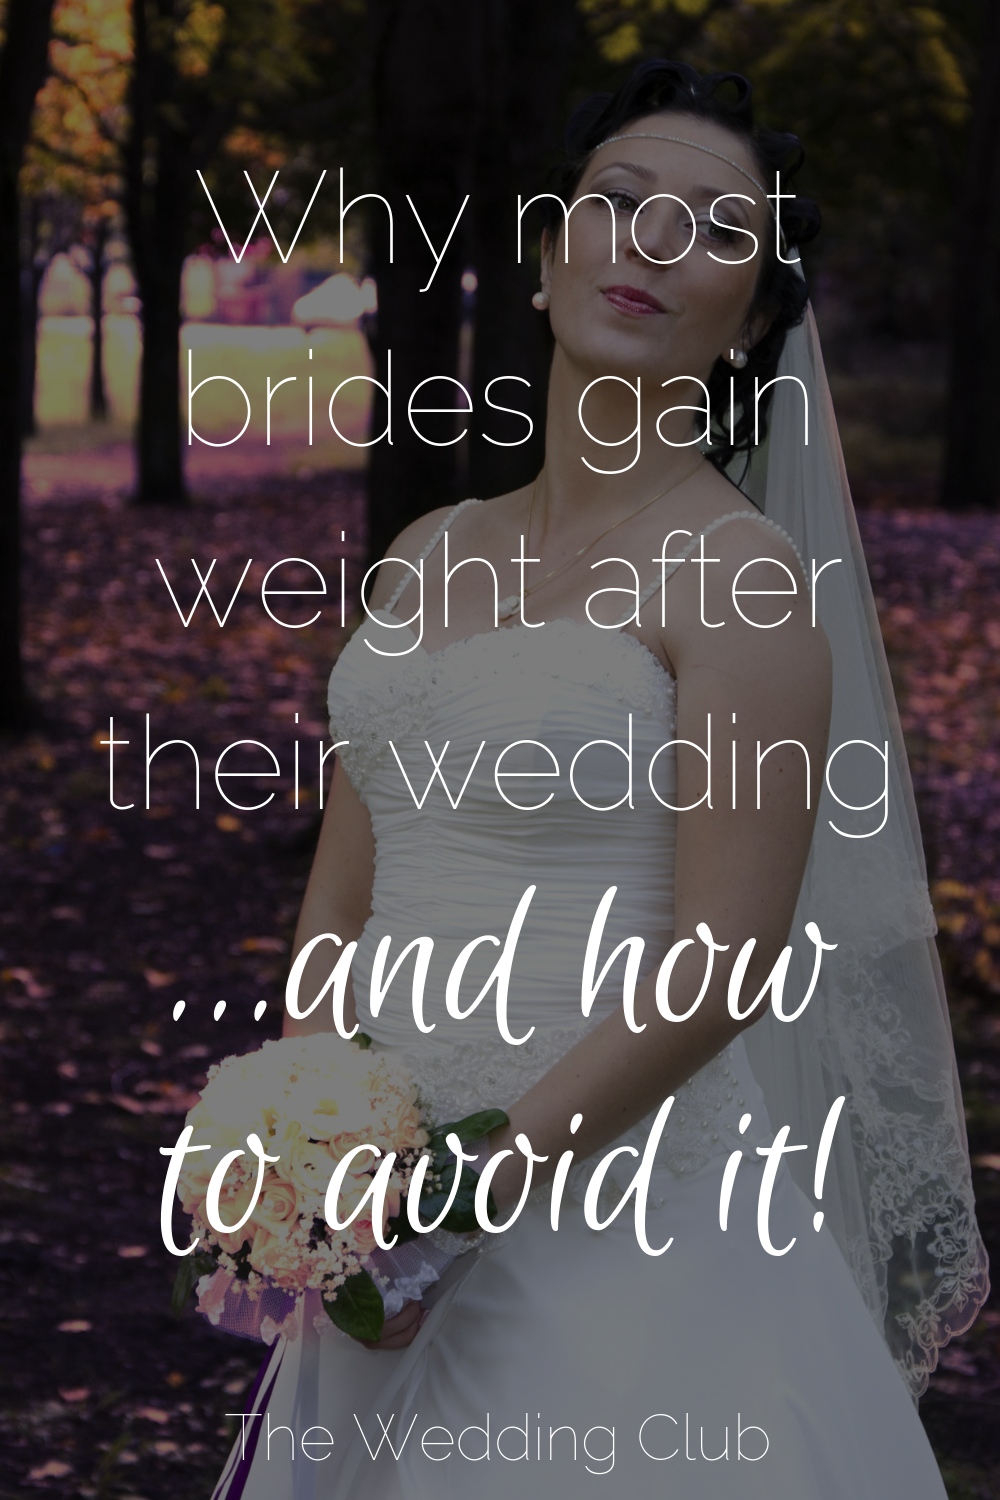 Why most brides gain weight after their wedding and how to avoid it